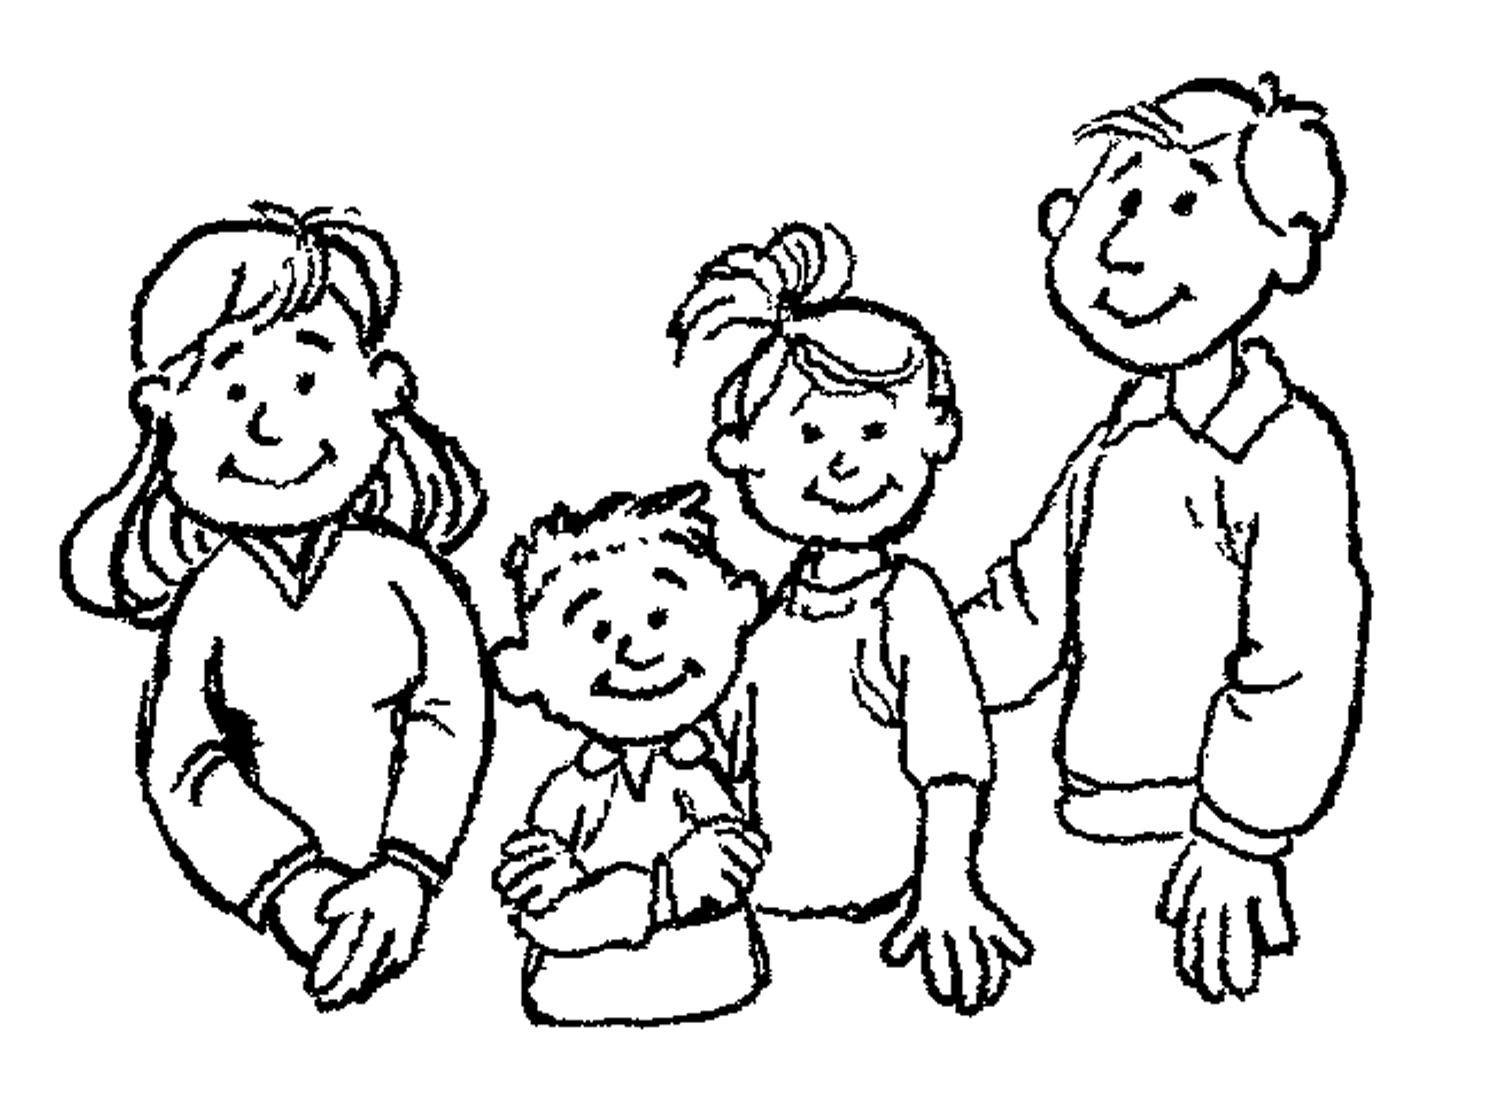 Family black and white clipart black and white family clipart